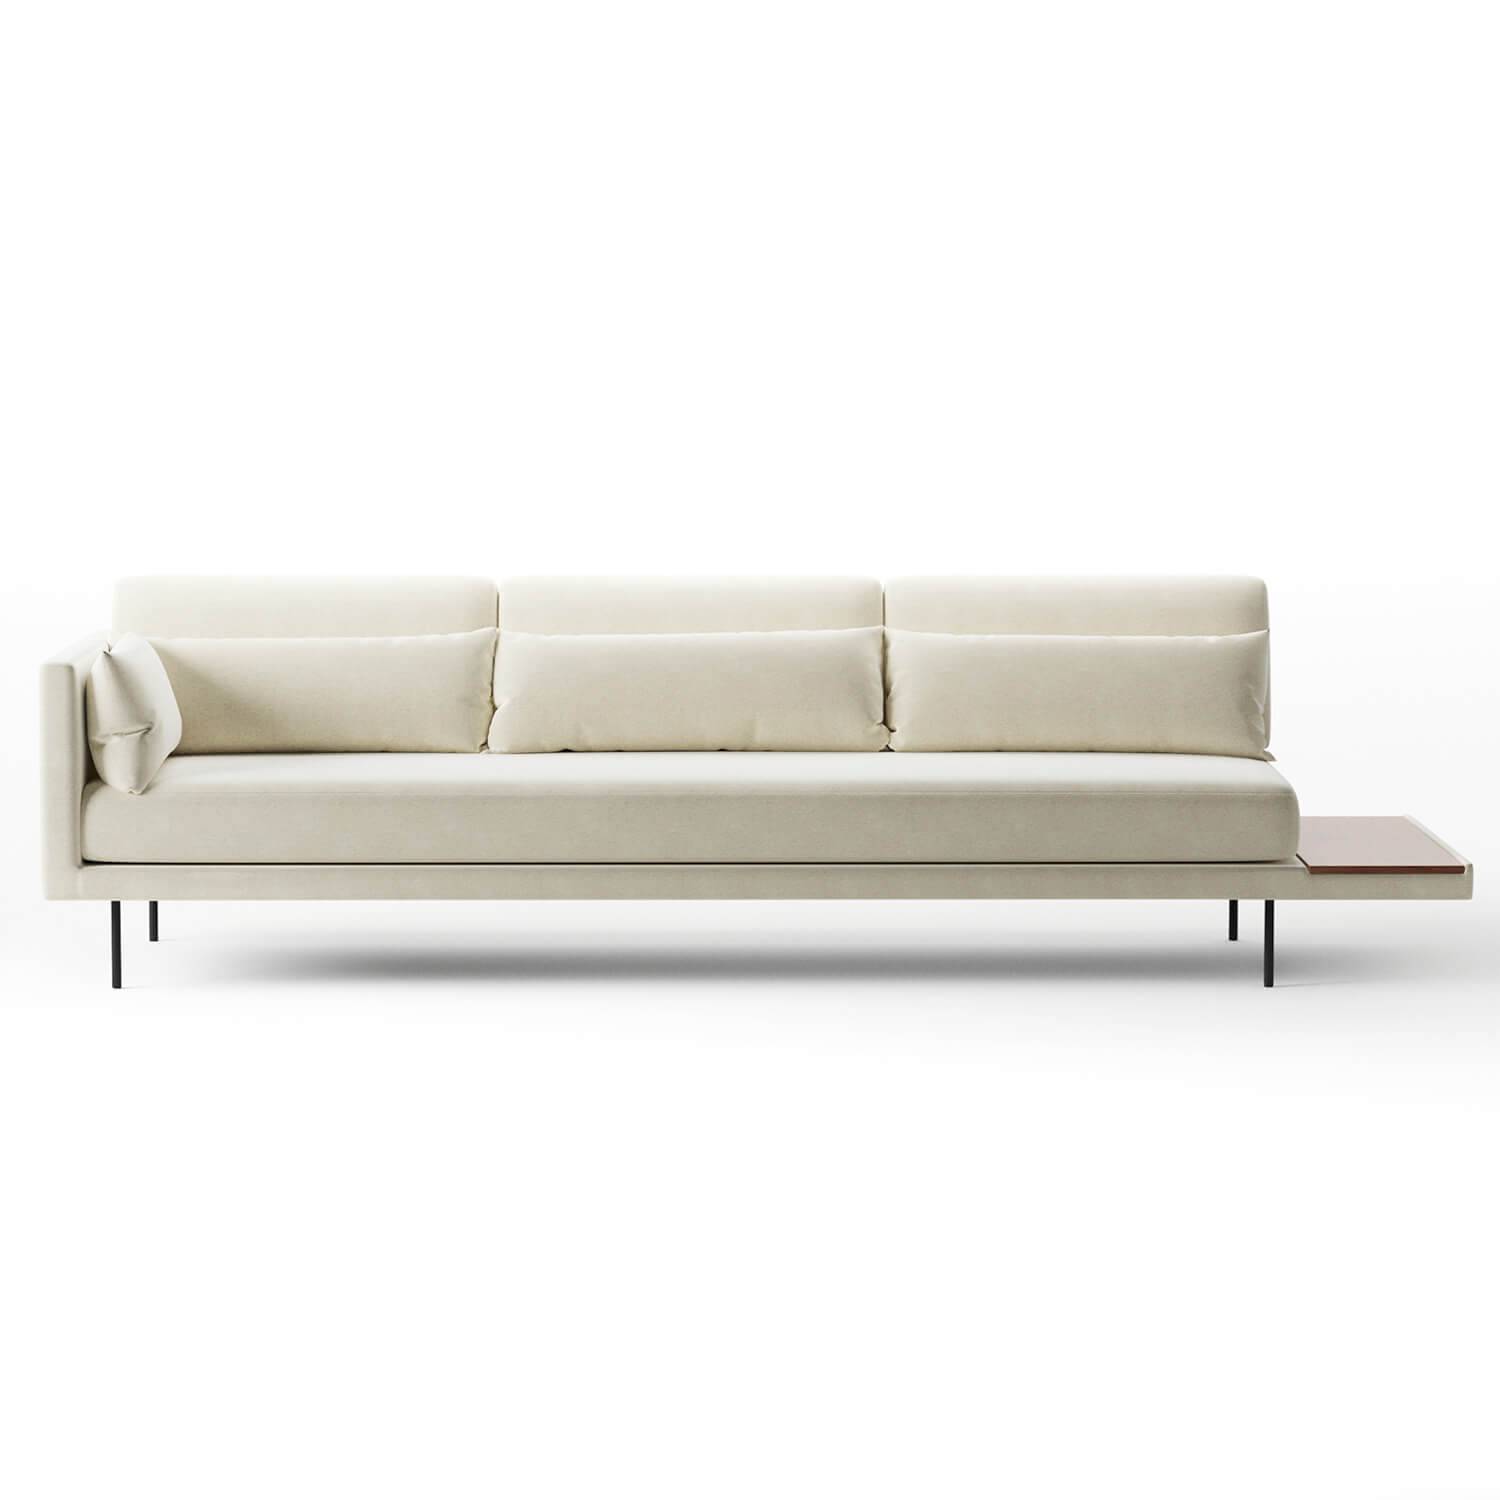 theo 3 seater sofa with right side wooden table